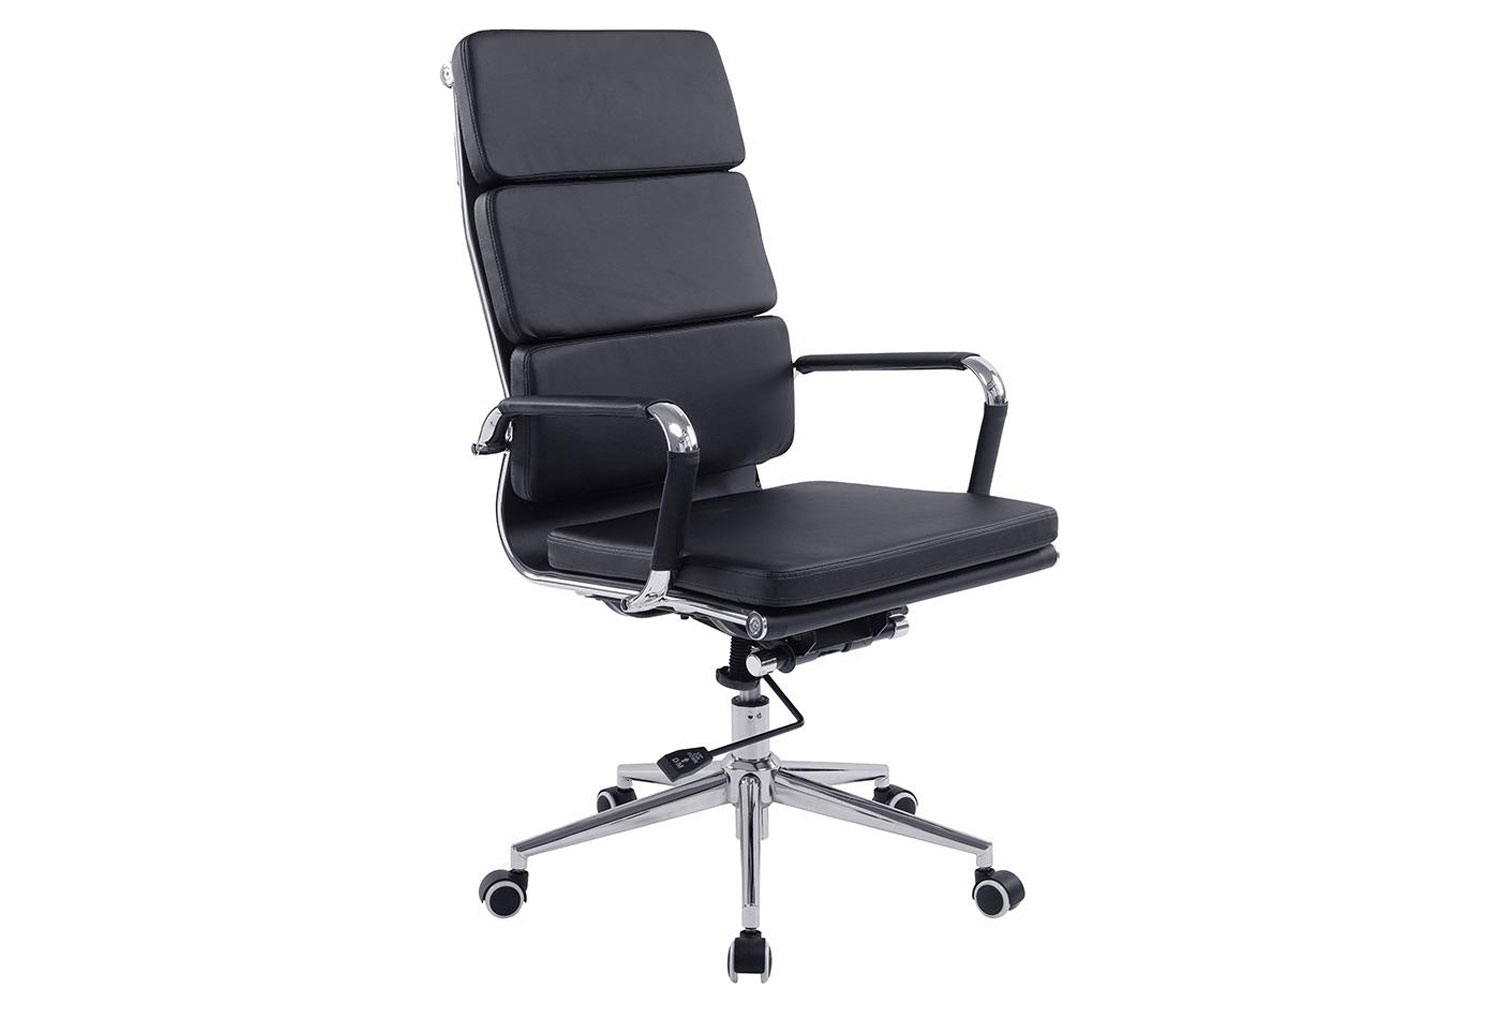 Farrell Bonded Leather Executive Office Chair (Black), Fully Installed